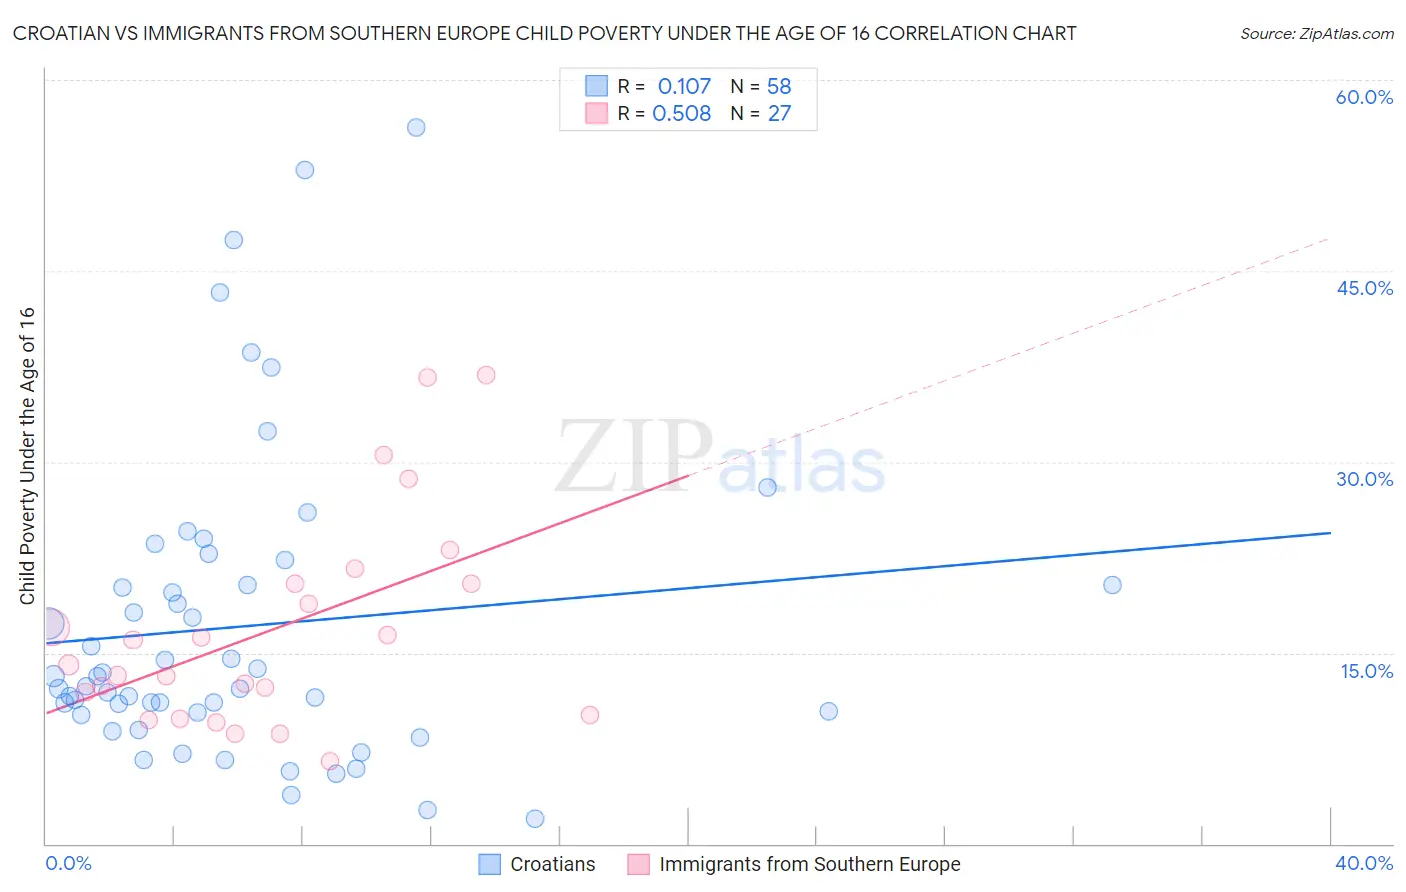 Croatian vs Immigrants from Southern Europe Child Poverty Under the Age of 16